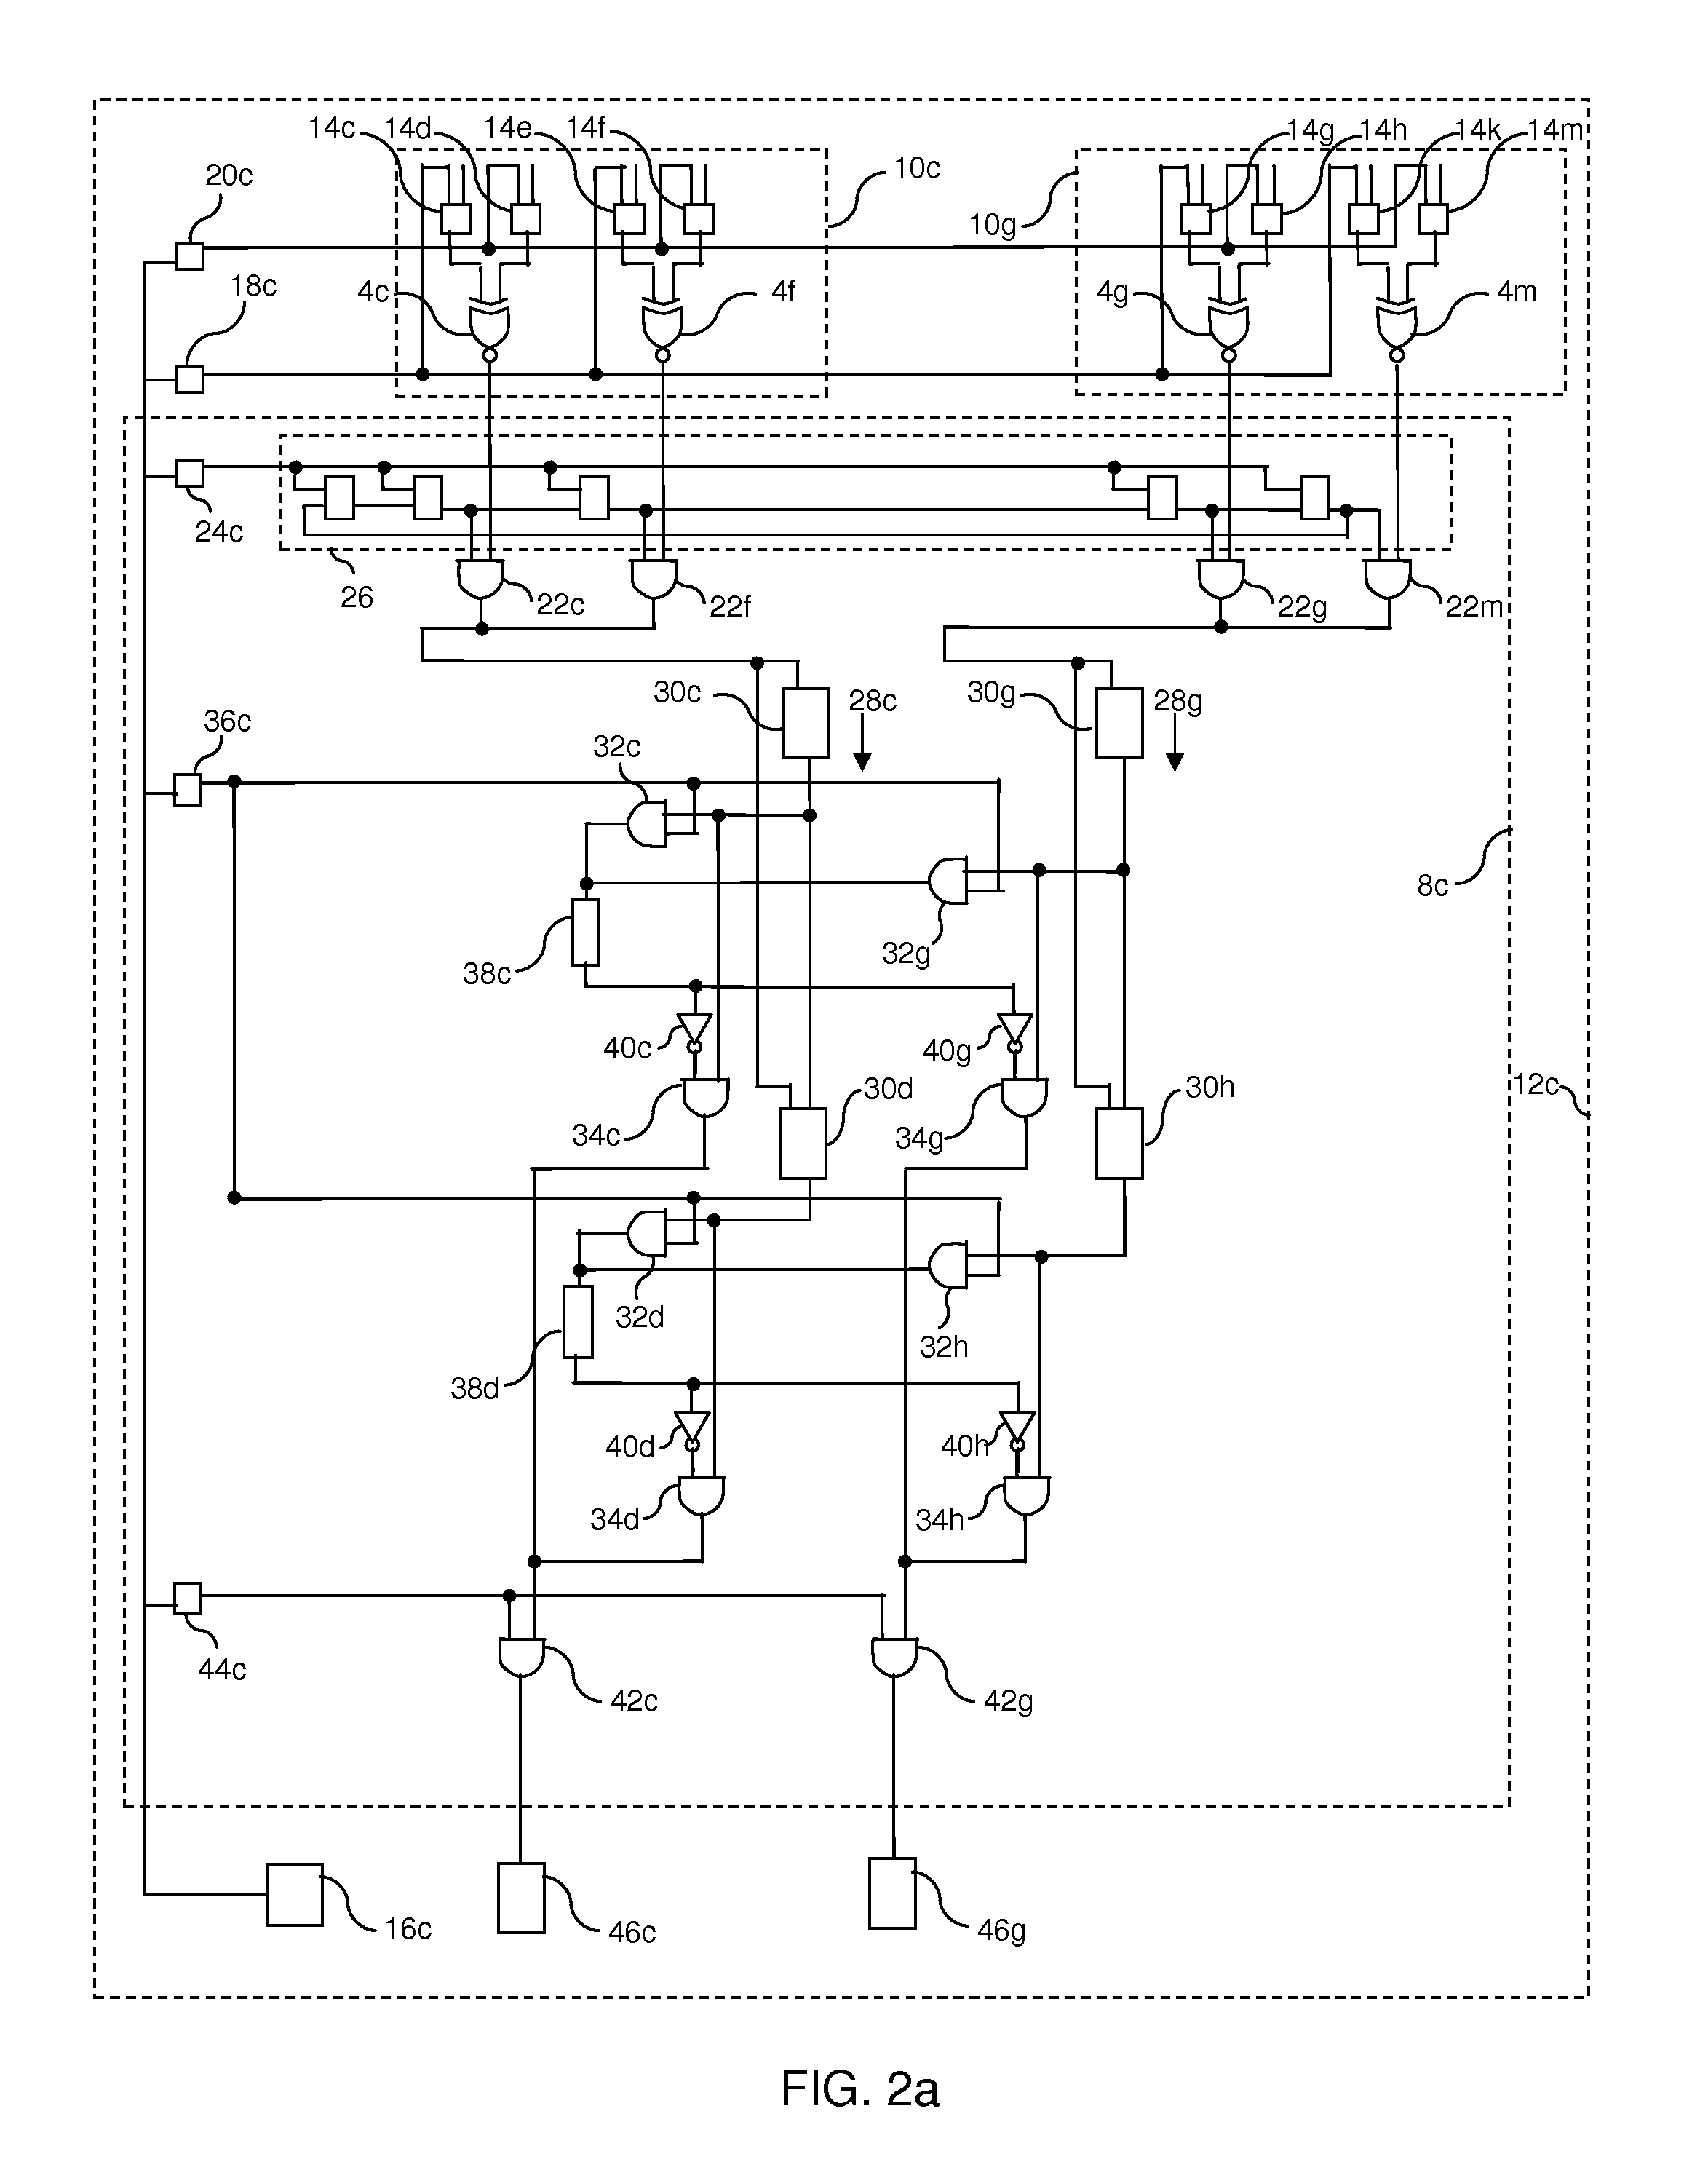 Method of Pattern Recognition for Artificial Intelligence